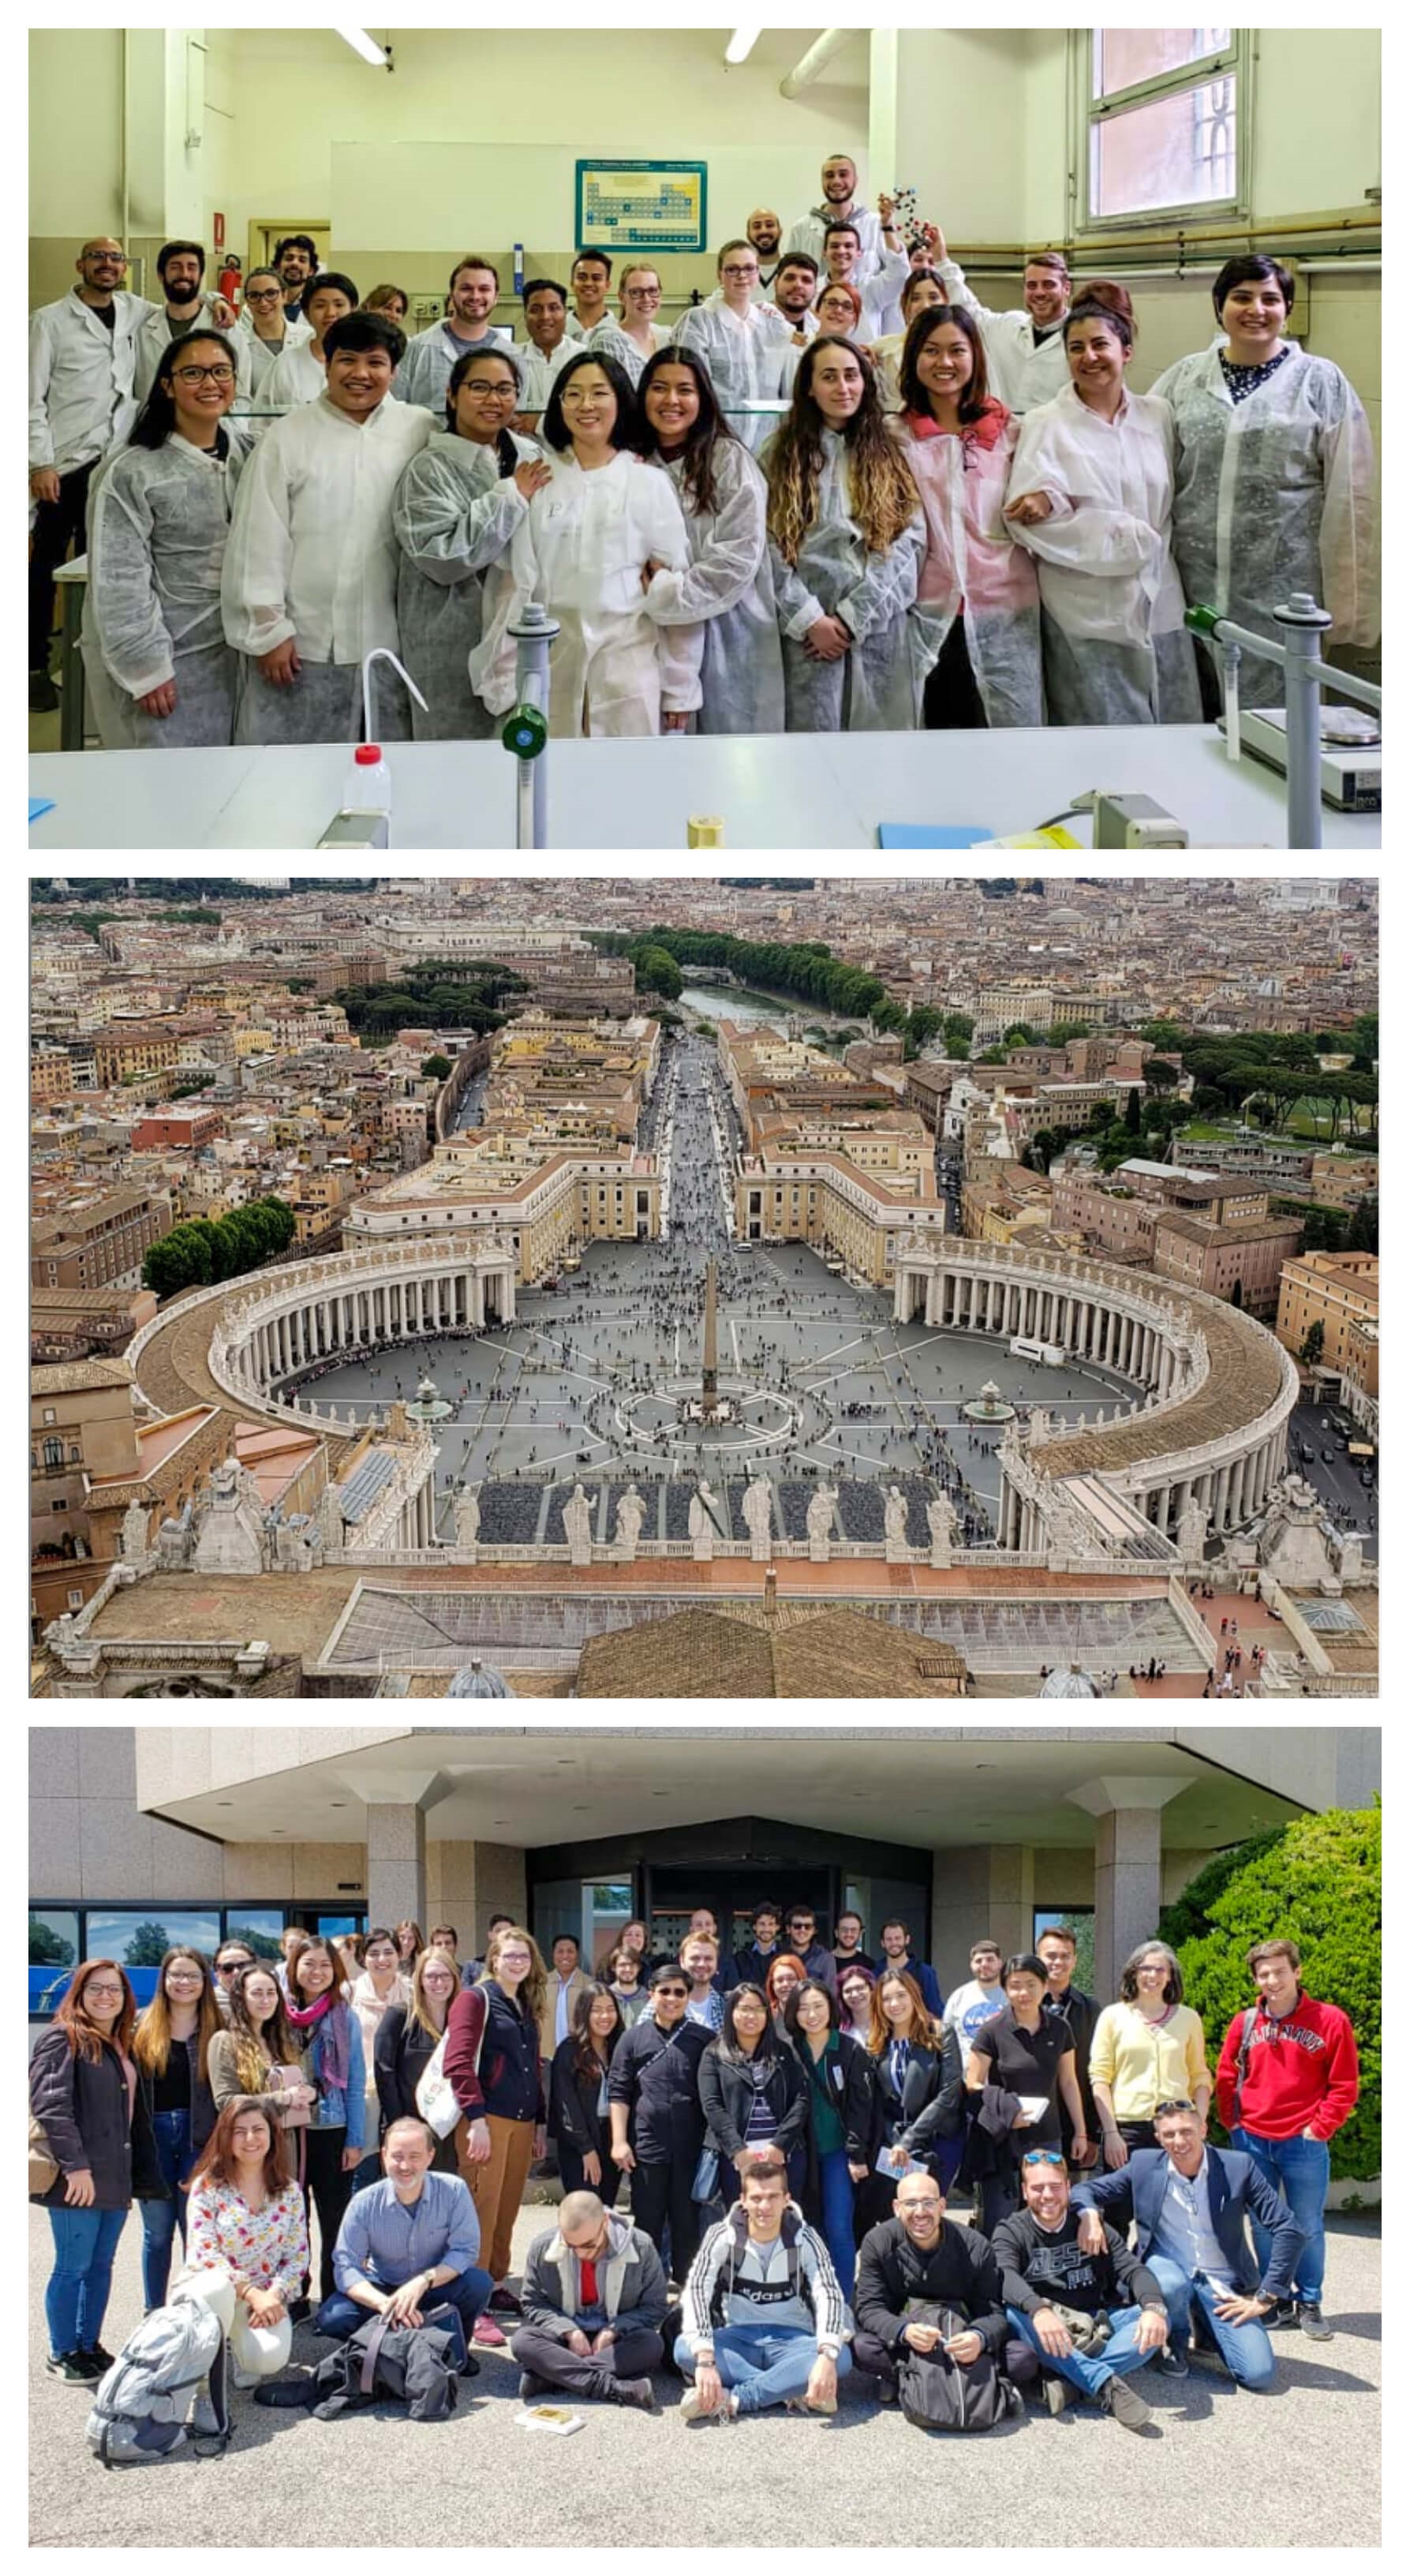 A collection of picture from the Faculty-led Program Abroad in Rome, Italy